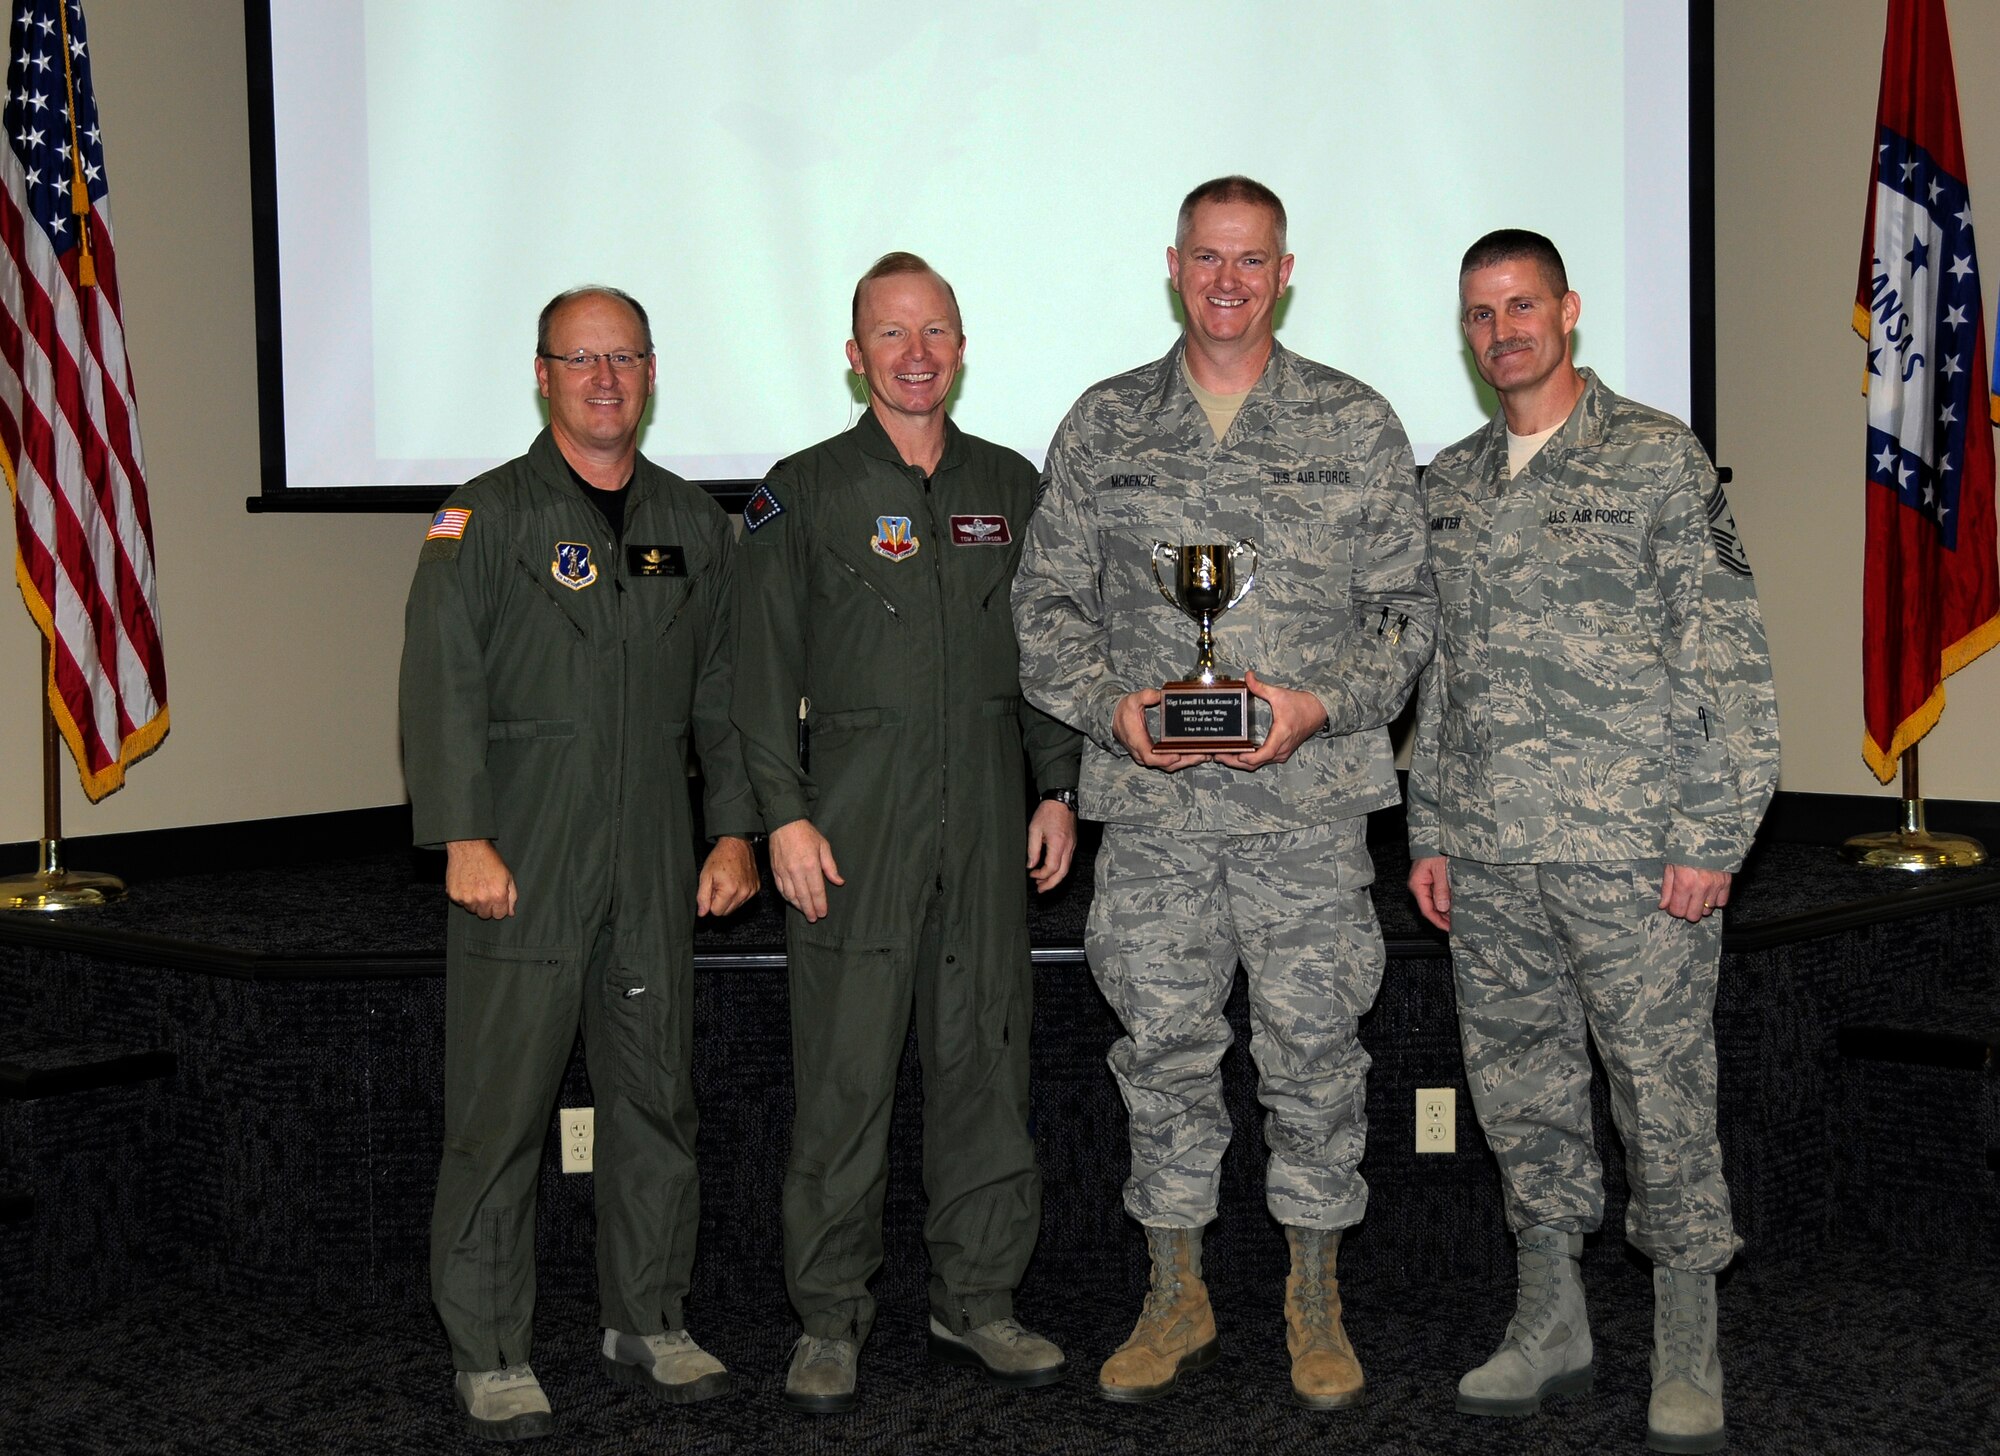 From left: Brig. Gen. Dwight Balch, Arkansas Air National Guard commander; Col. Tom Anderson, 188th Fighter Wing commander; Staff Sgt. Lowell McKenzie Jr.; and Chief Master Sgt. Asa Carter, 188th command chief. McKenzie, a member of the 188th Civil Engineer Squadron, was named Outstanding Noncommissioned Officer of the Year during a commander’s call Dec. 3. (U.S. Air Force photo by Airman 1st Class Hannah Landeros/188th Fighter Wing Public Affairs)

